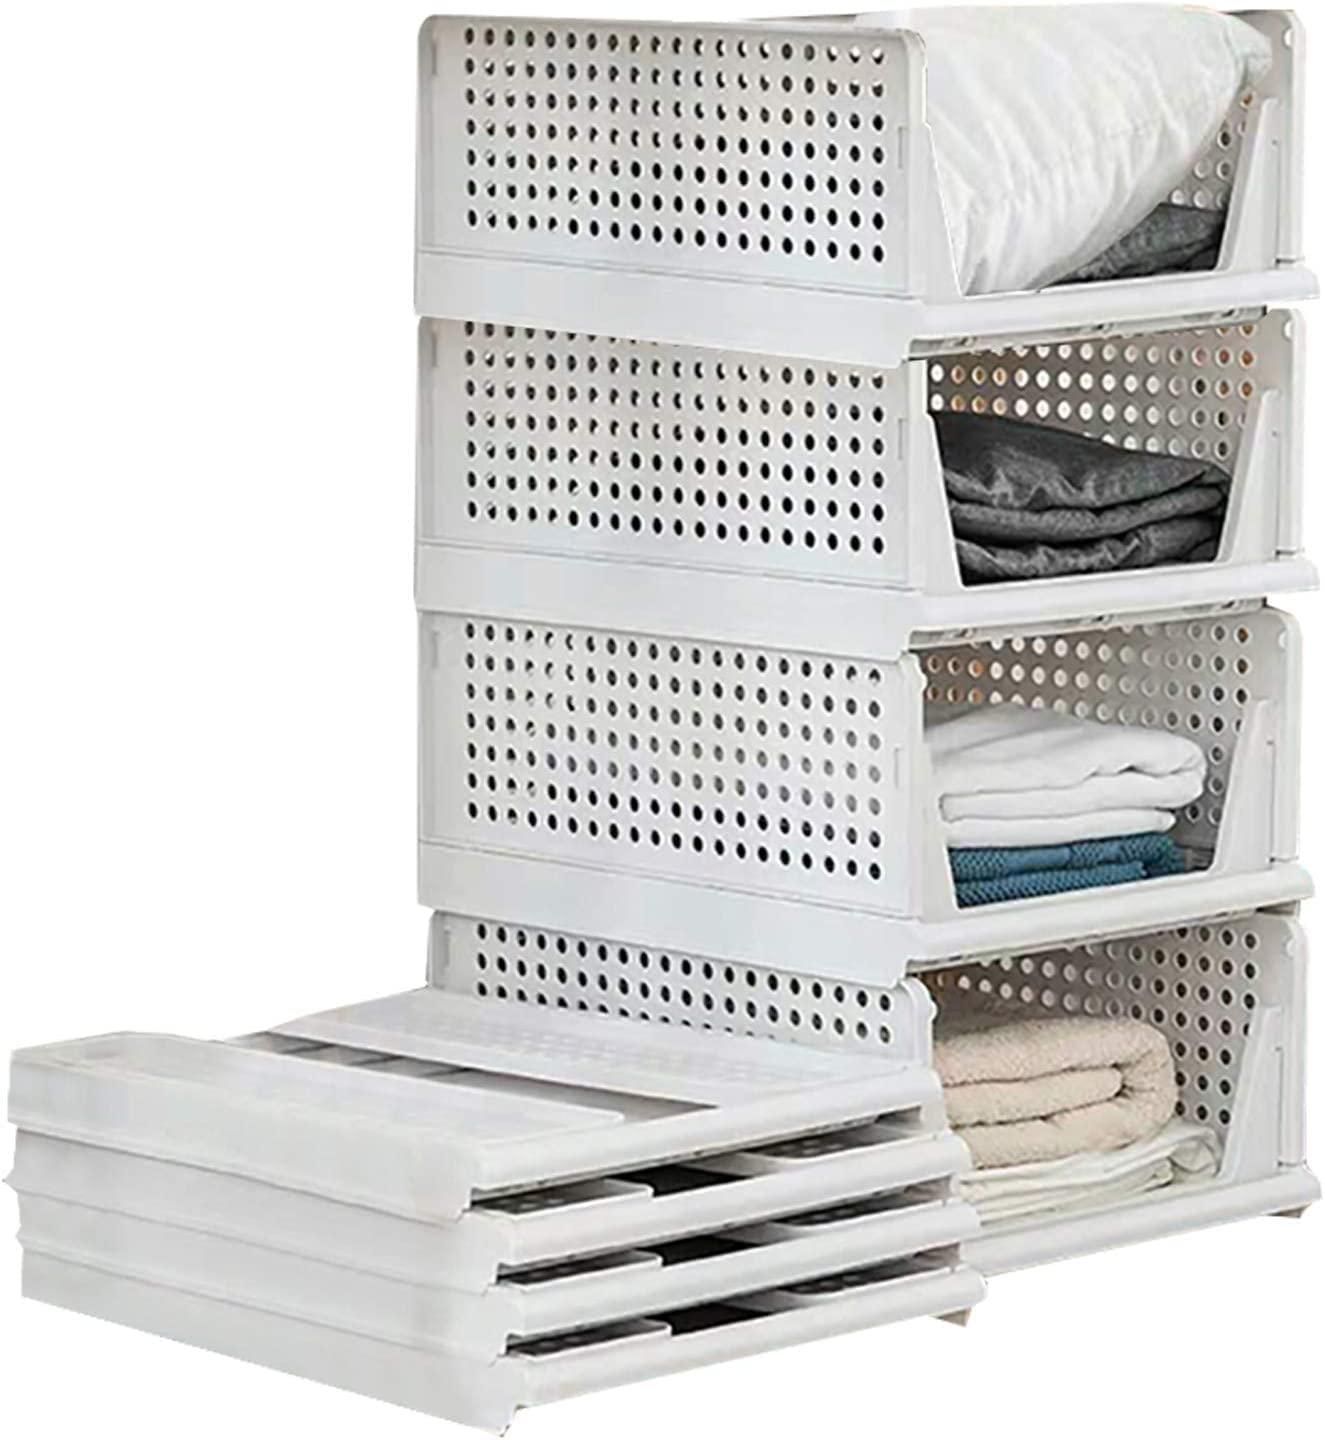 Stackable Closet Organizer Plastic Drawer Foldable Wardrobe Cabinet Clothes  Storage Box Rack Shelf Bins Basket Office Container